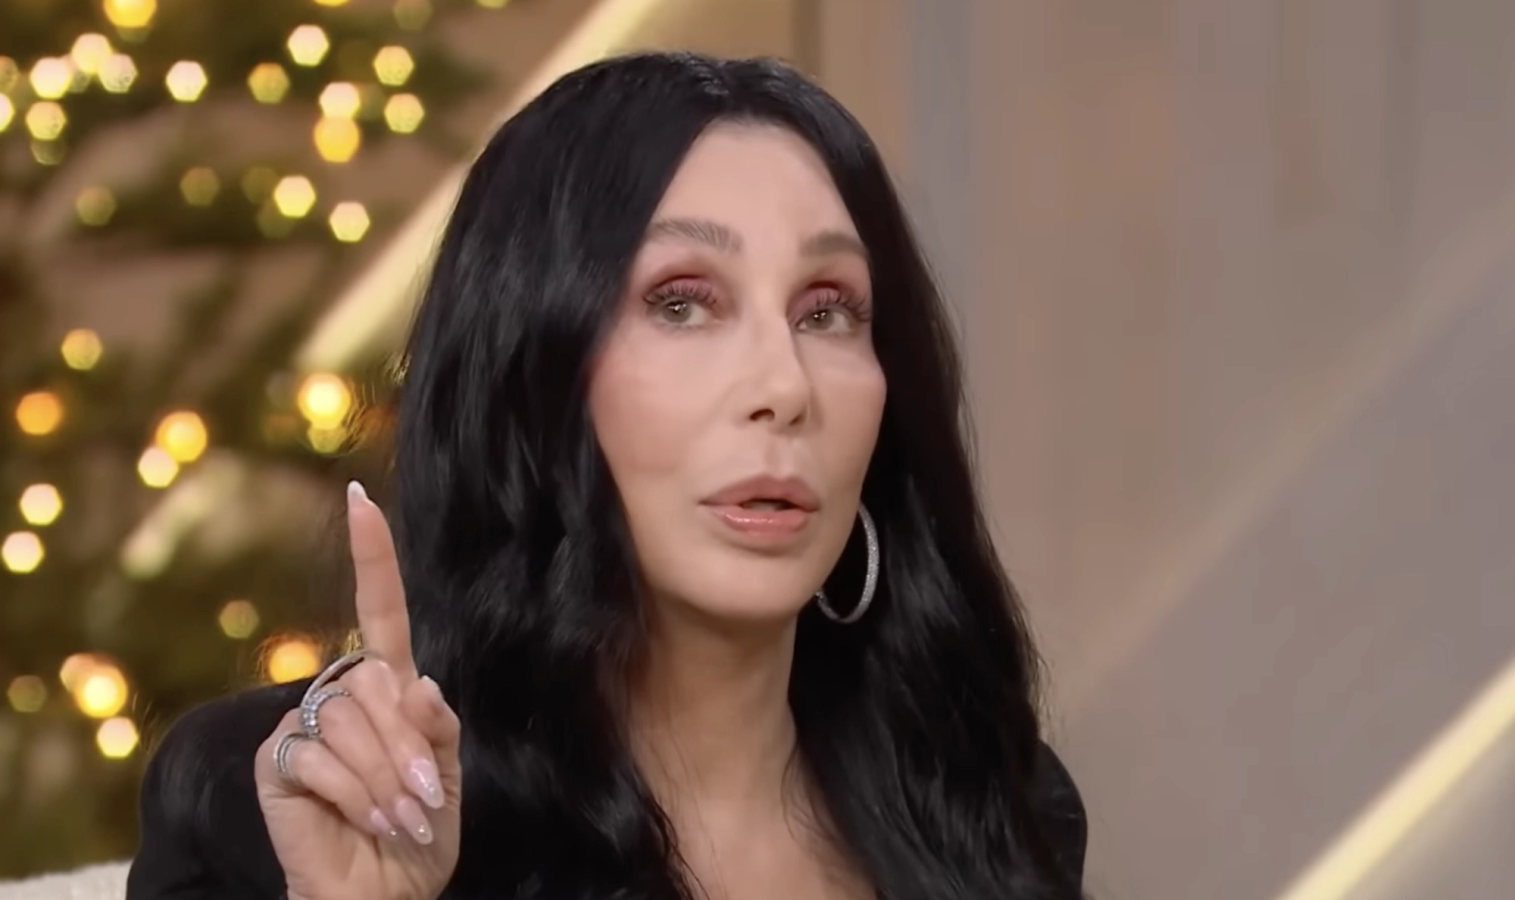 cher-turns-alcoholic-because-of-alexander-ae-edwards-friends-reportedly-fear-songstress-will-party-herself-into-catastrophic-collapse